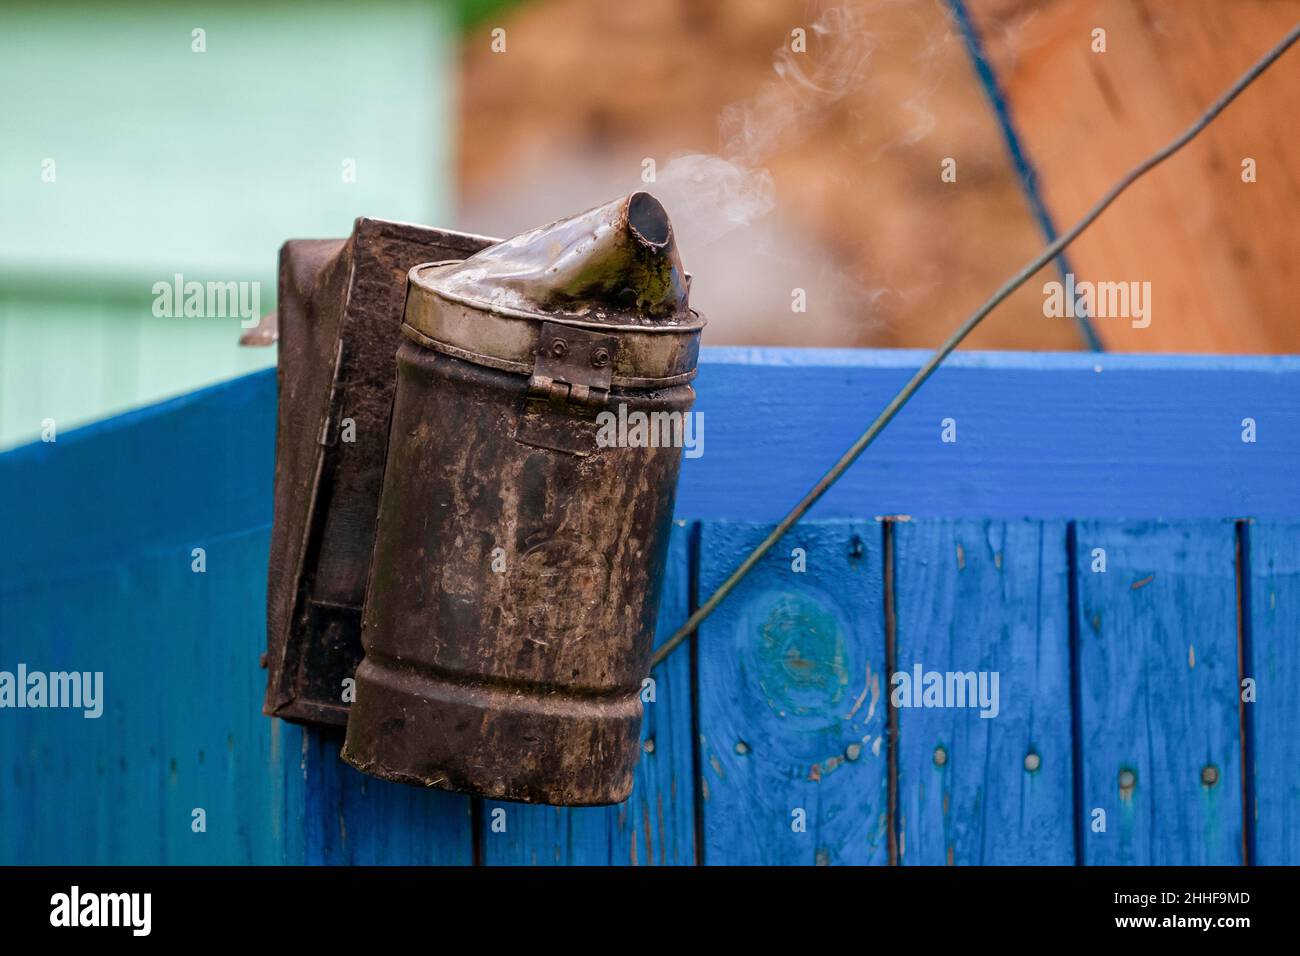 A beekeeper's tool for putting bees to sleep. Bee smoker works. Smoke coming out of the instrument Stock Photo